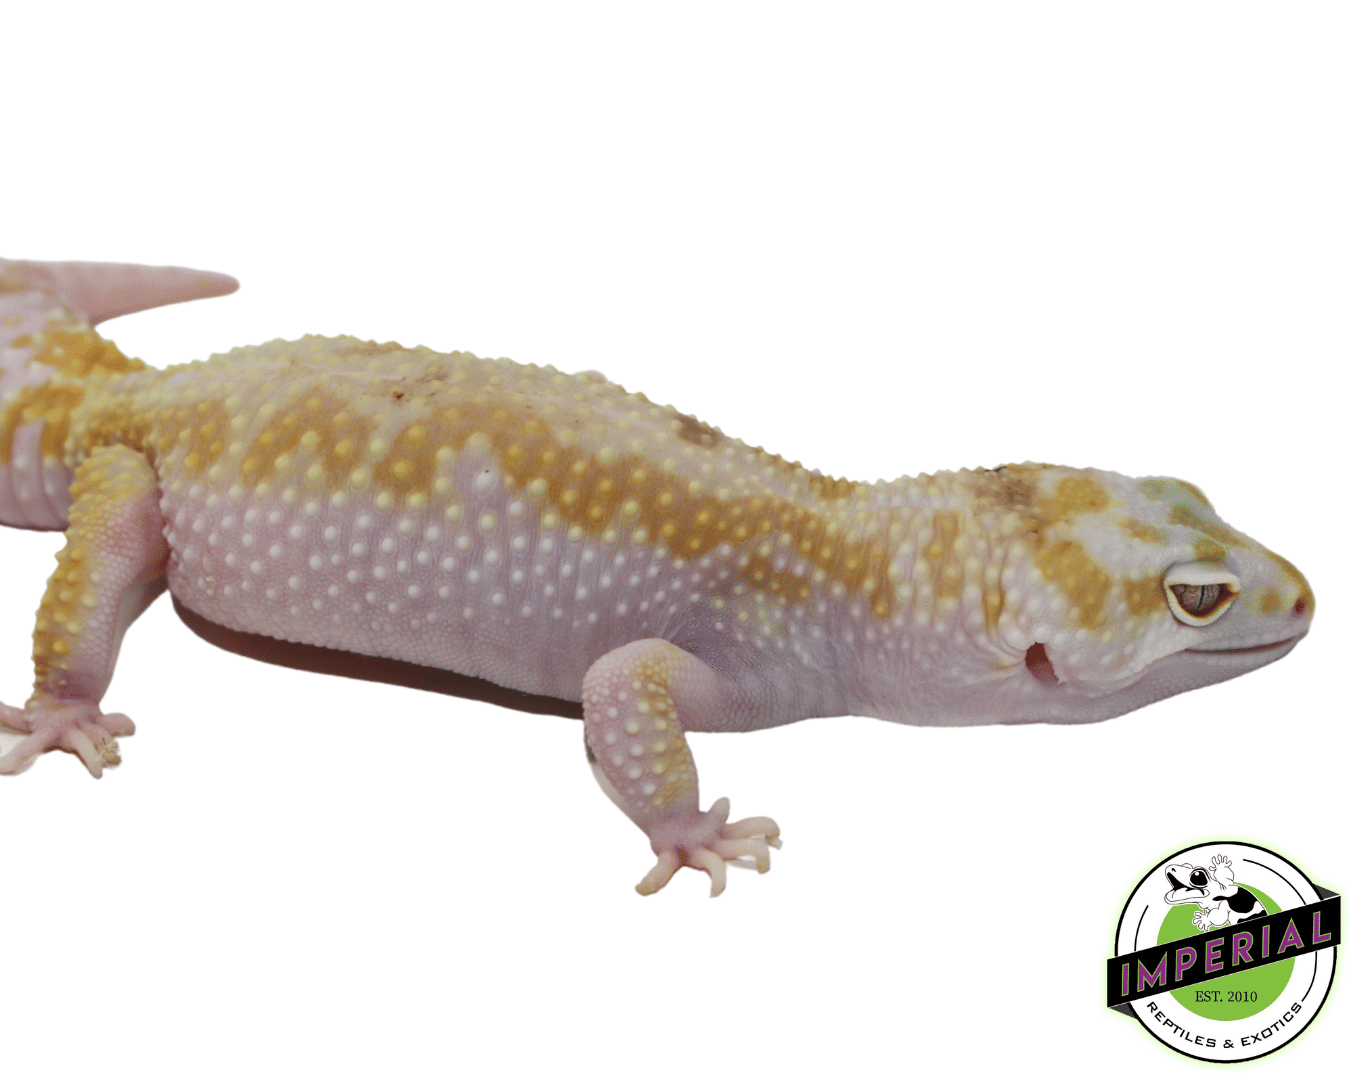 tremper white and yellow leopard gecko for sale, buy reptiles online